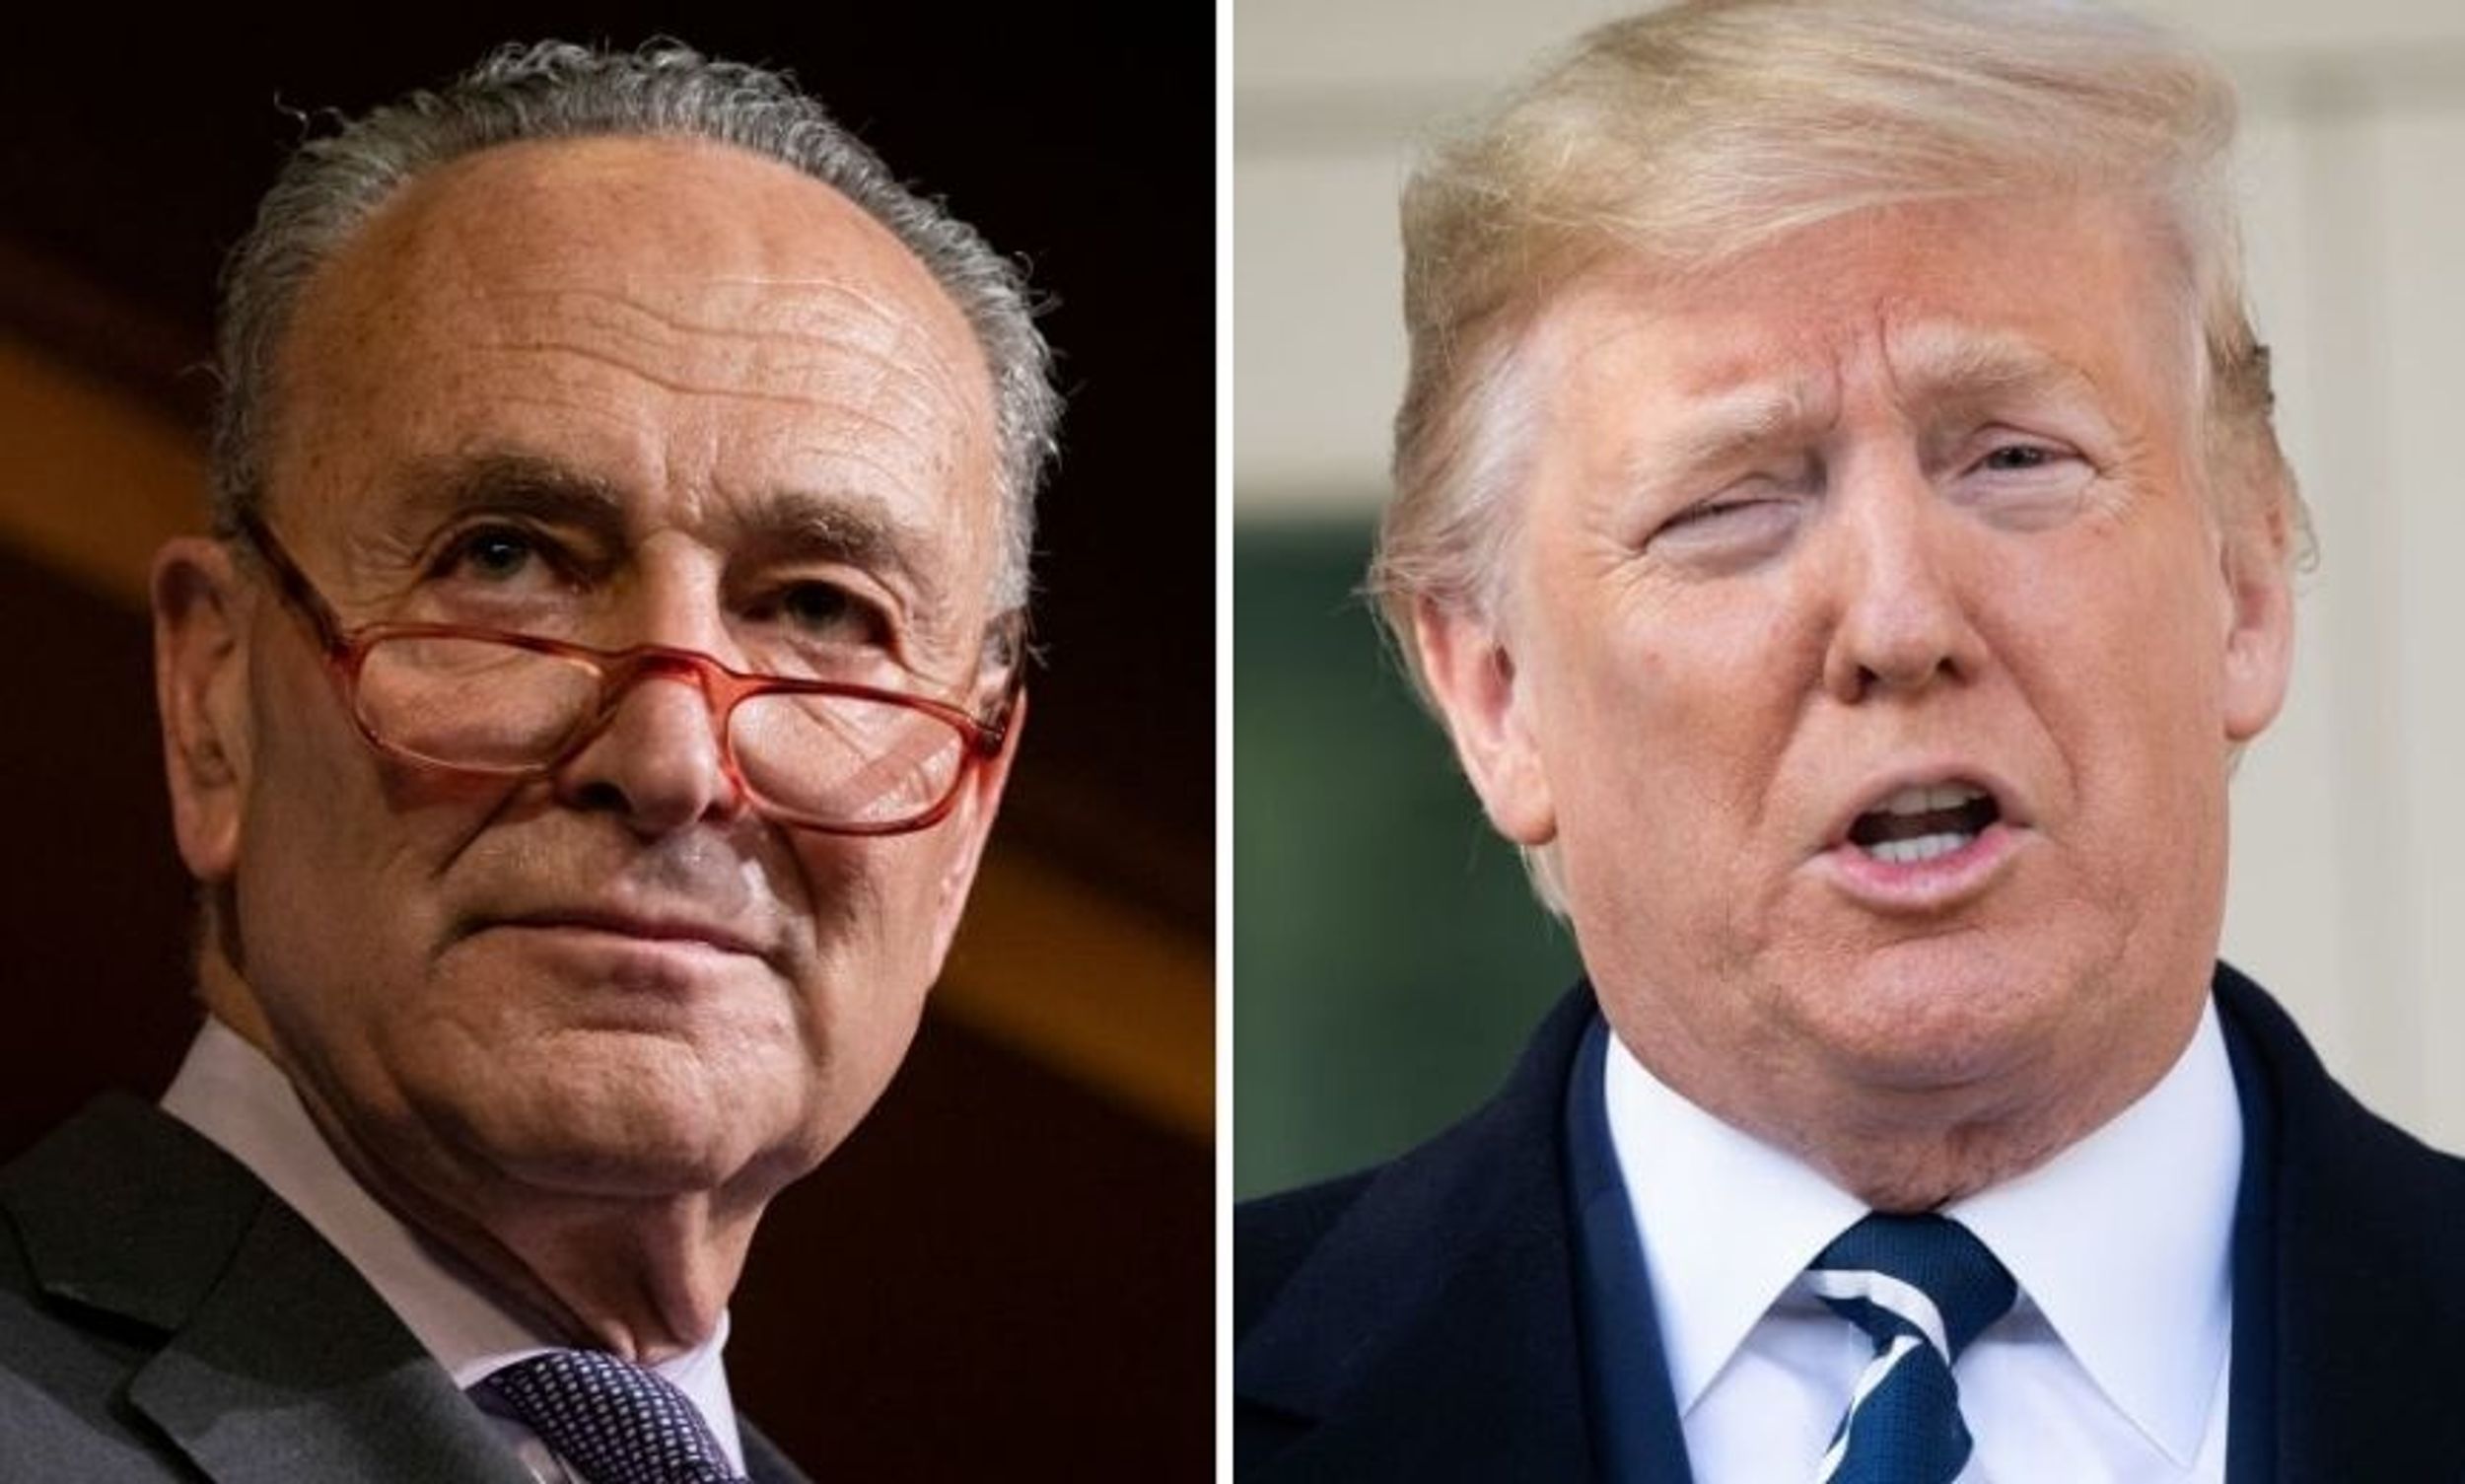 Chuck Schumer Perfectly Shames Trump After His Justice Department Signals It Will Override Roger Stone Sentencing